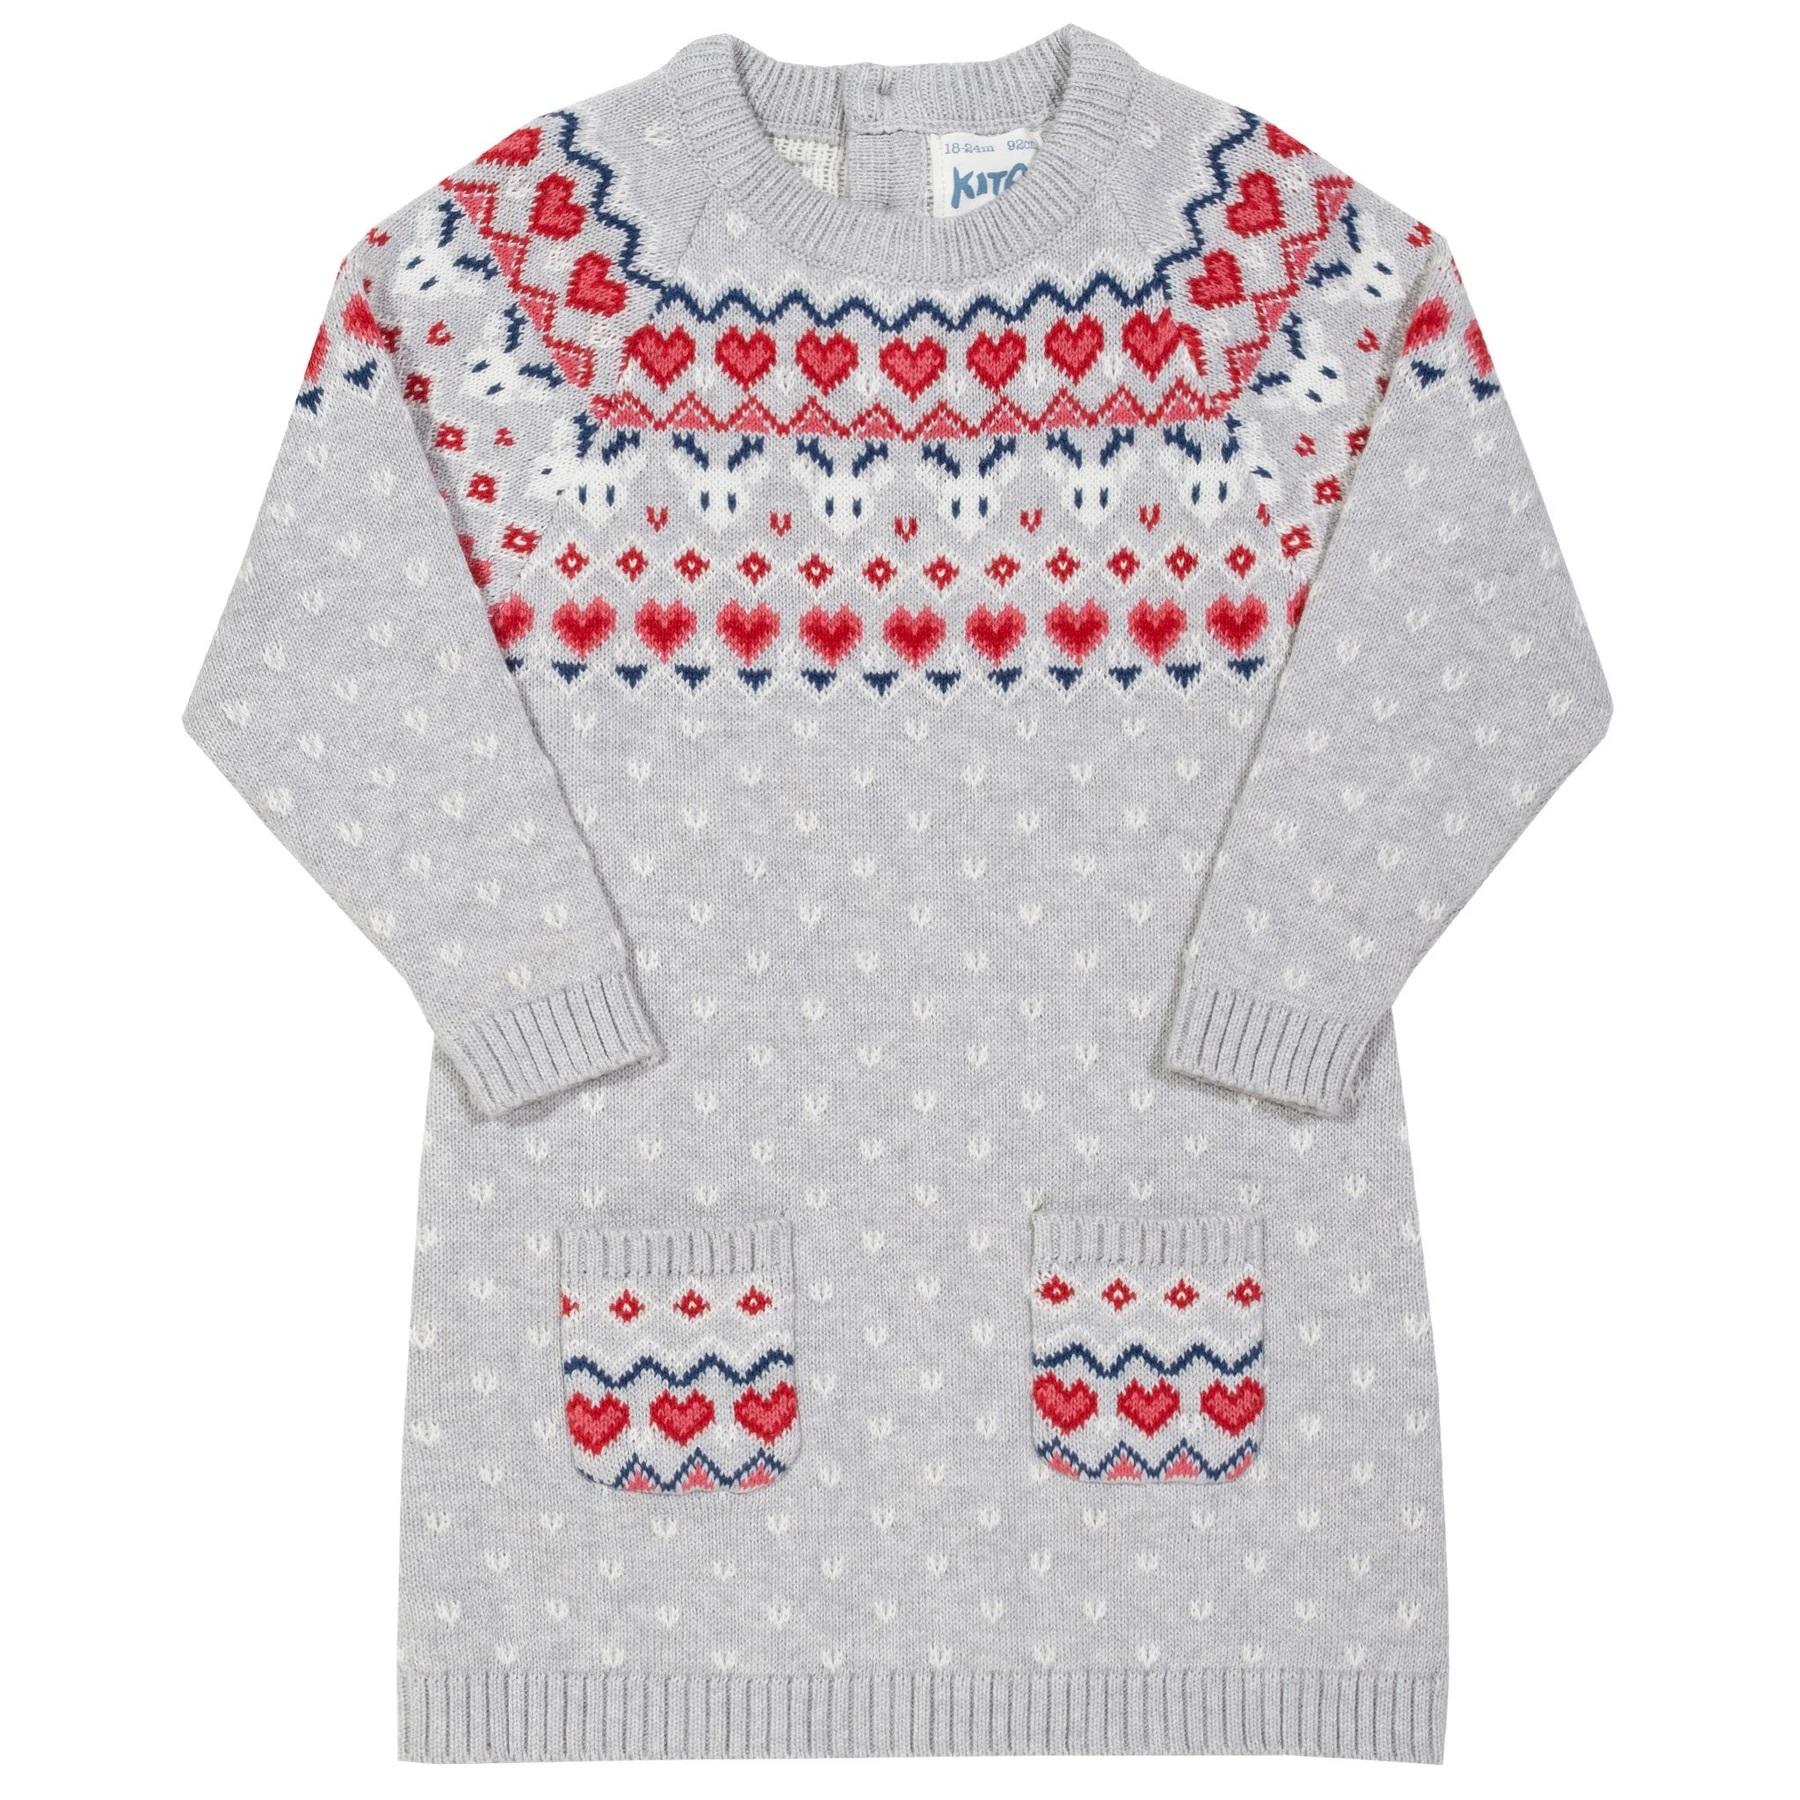 Kite Clothing Nordic Heart Knit Dress front